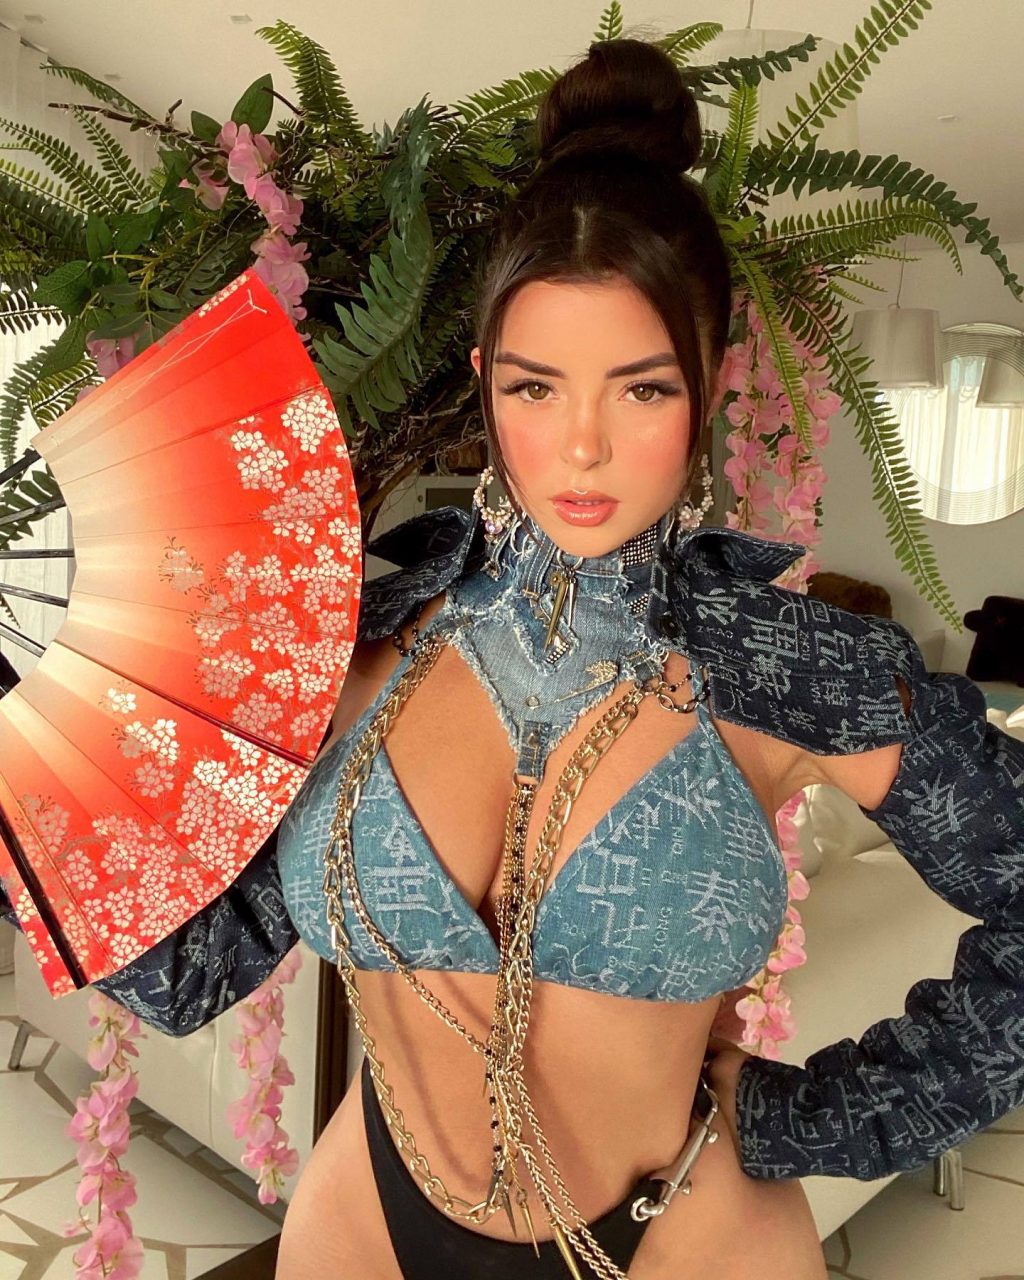 Demi Rose Flaunts Her Sexy Figure (20 Photos + Video)